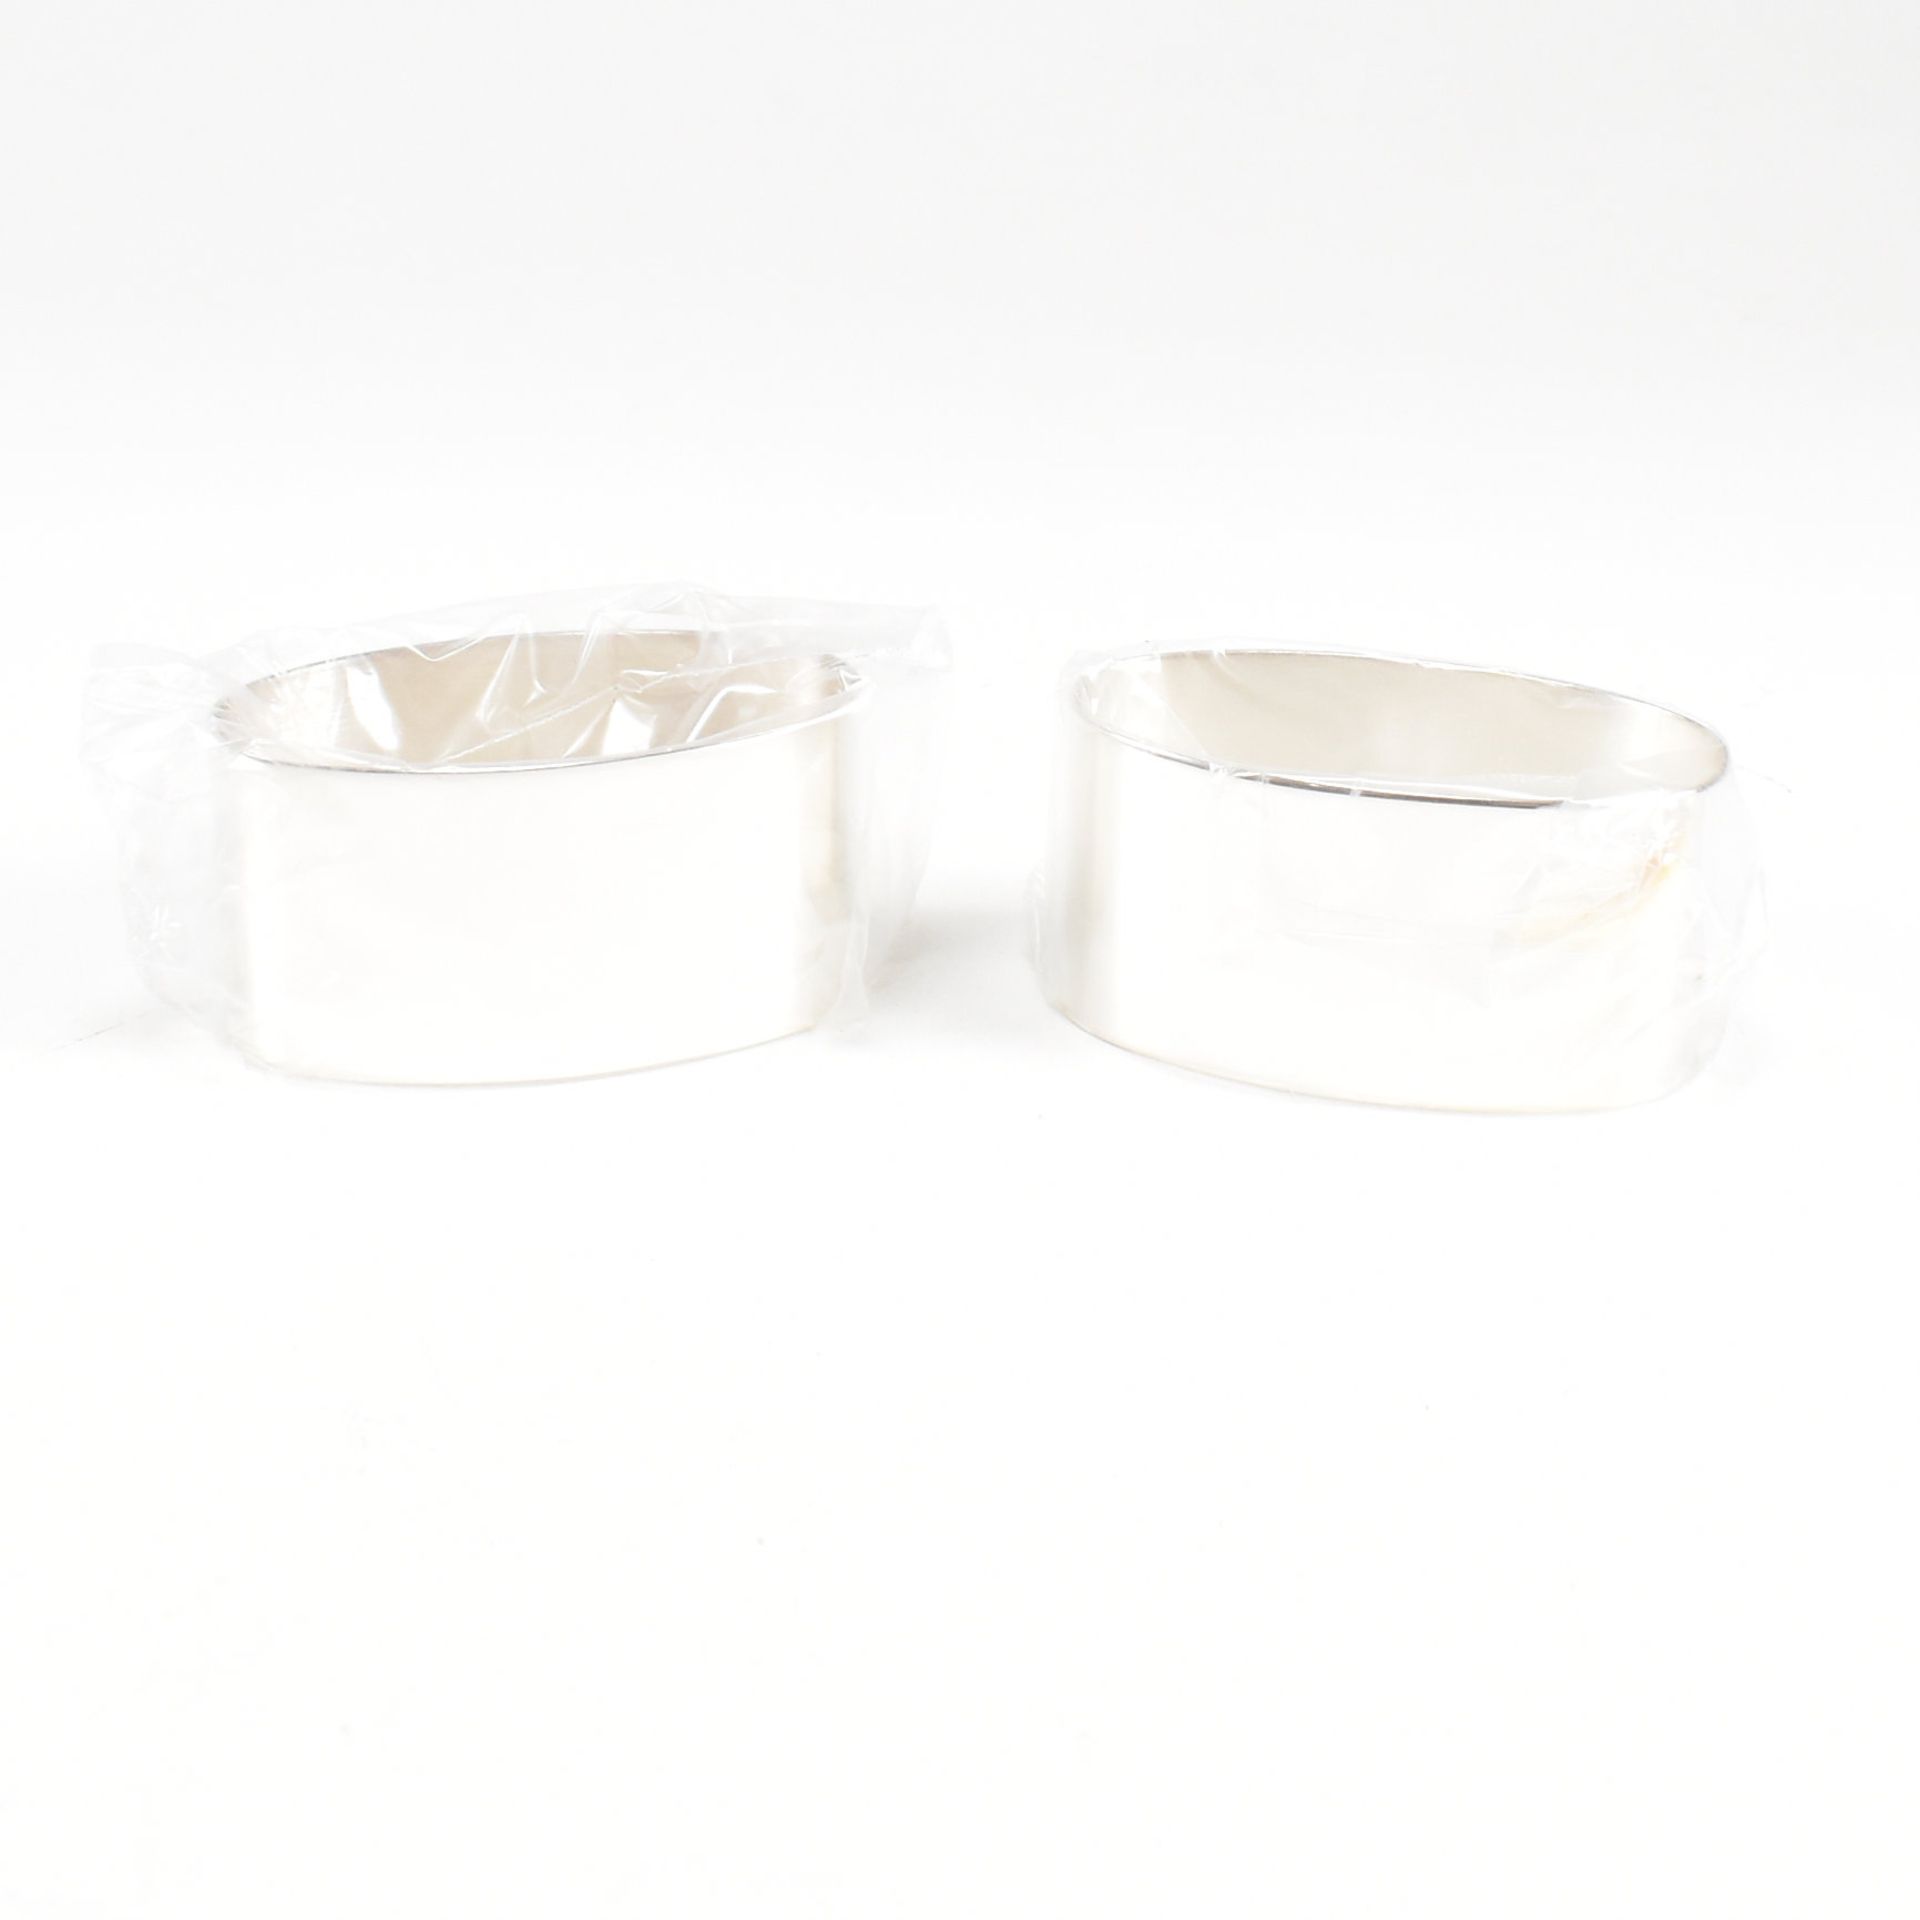 1990S CASED PAIR OF NAPKIN RINGS - Image 3 of 11